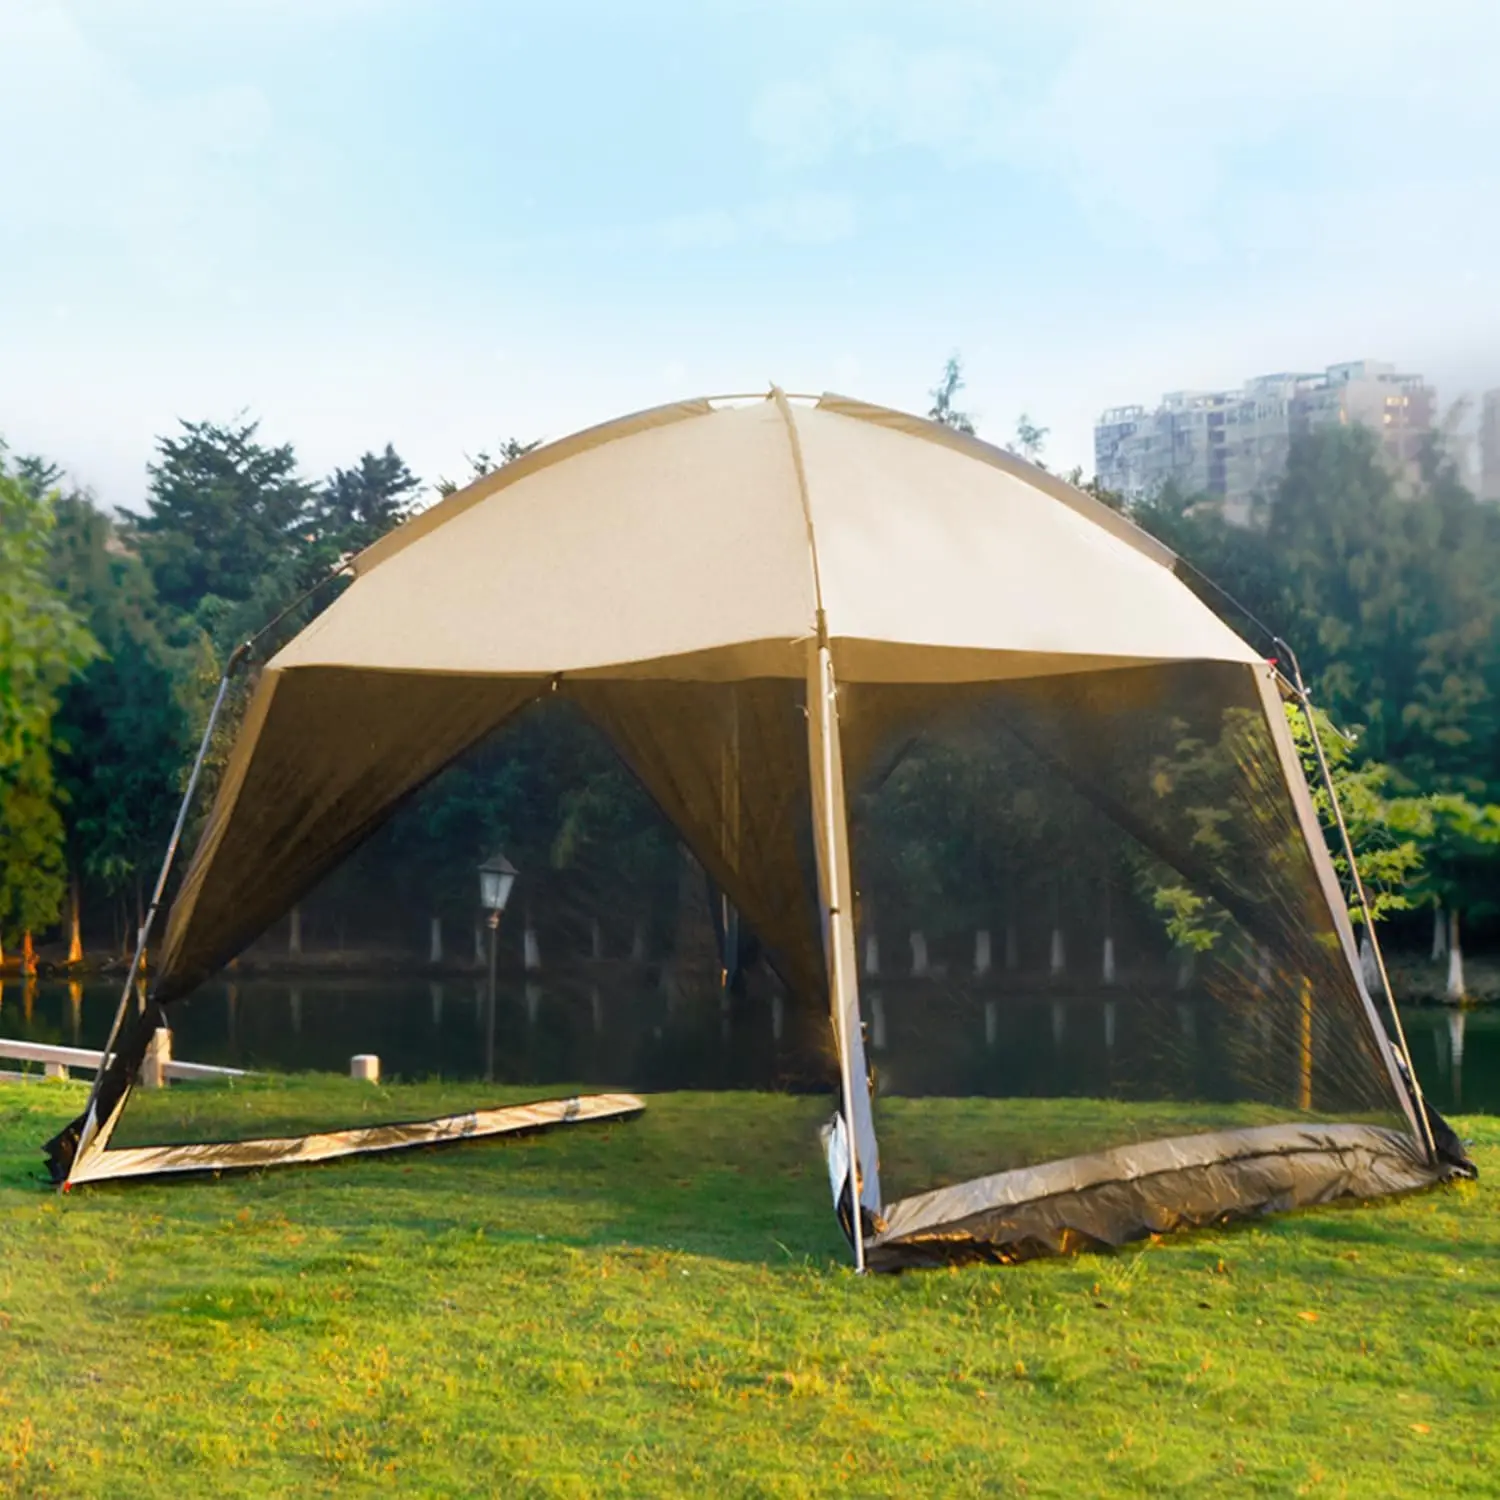 Outdoor Camping Canopy Tent Sun Shade Gazebo Shelter Included,Easy Setup & Waterproof,Perfect for Family Picnic Patio,Khaki